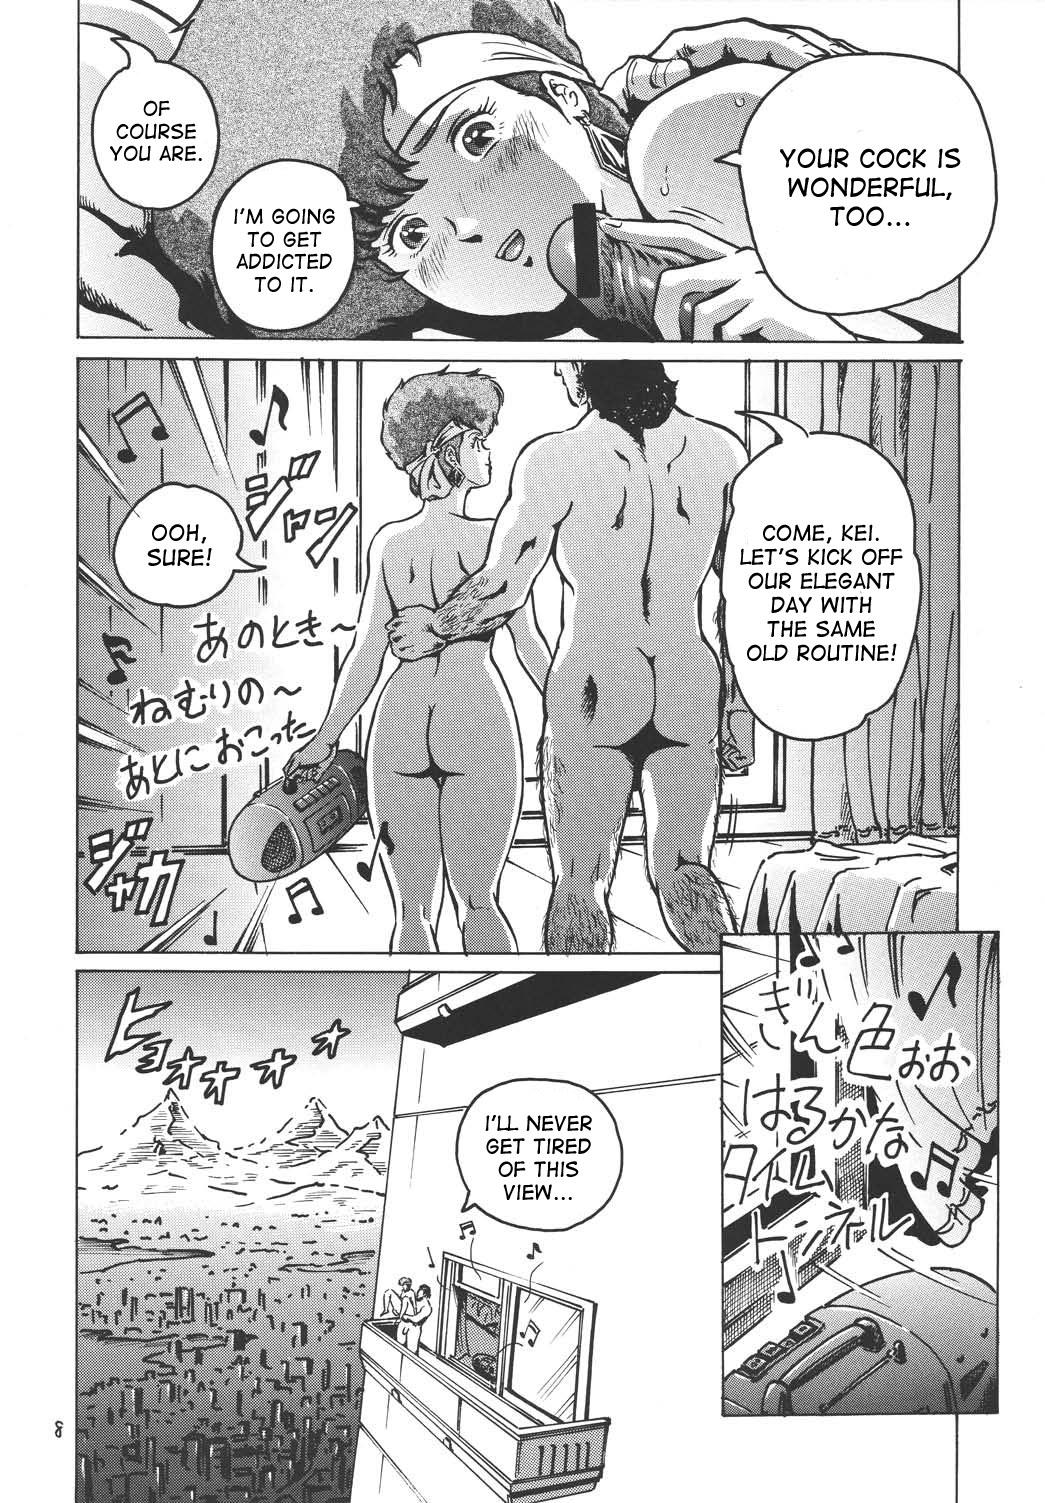 Analfucking Love Angel - Dirty pair Lover - Page 7